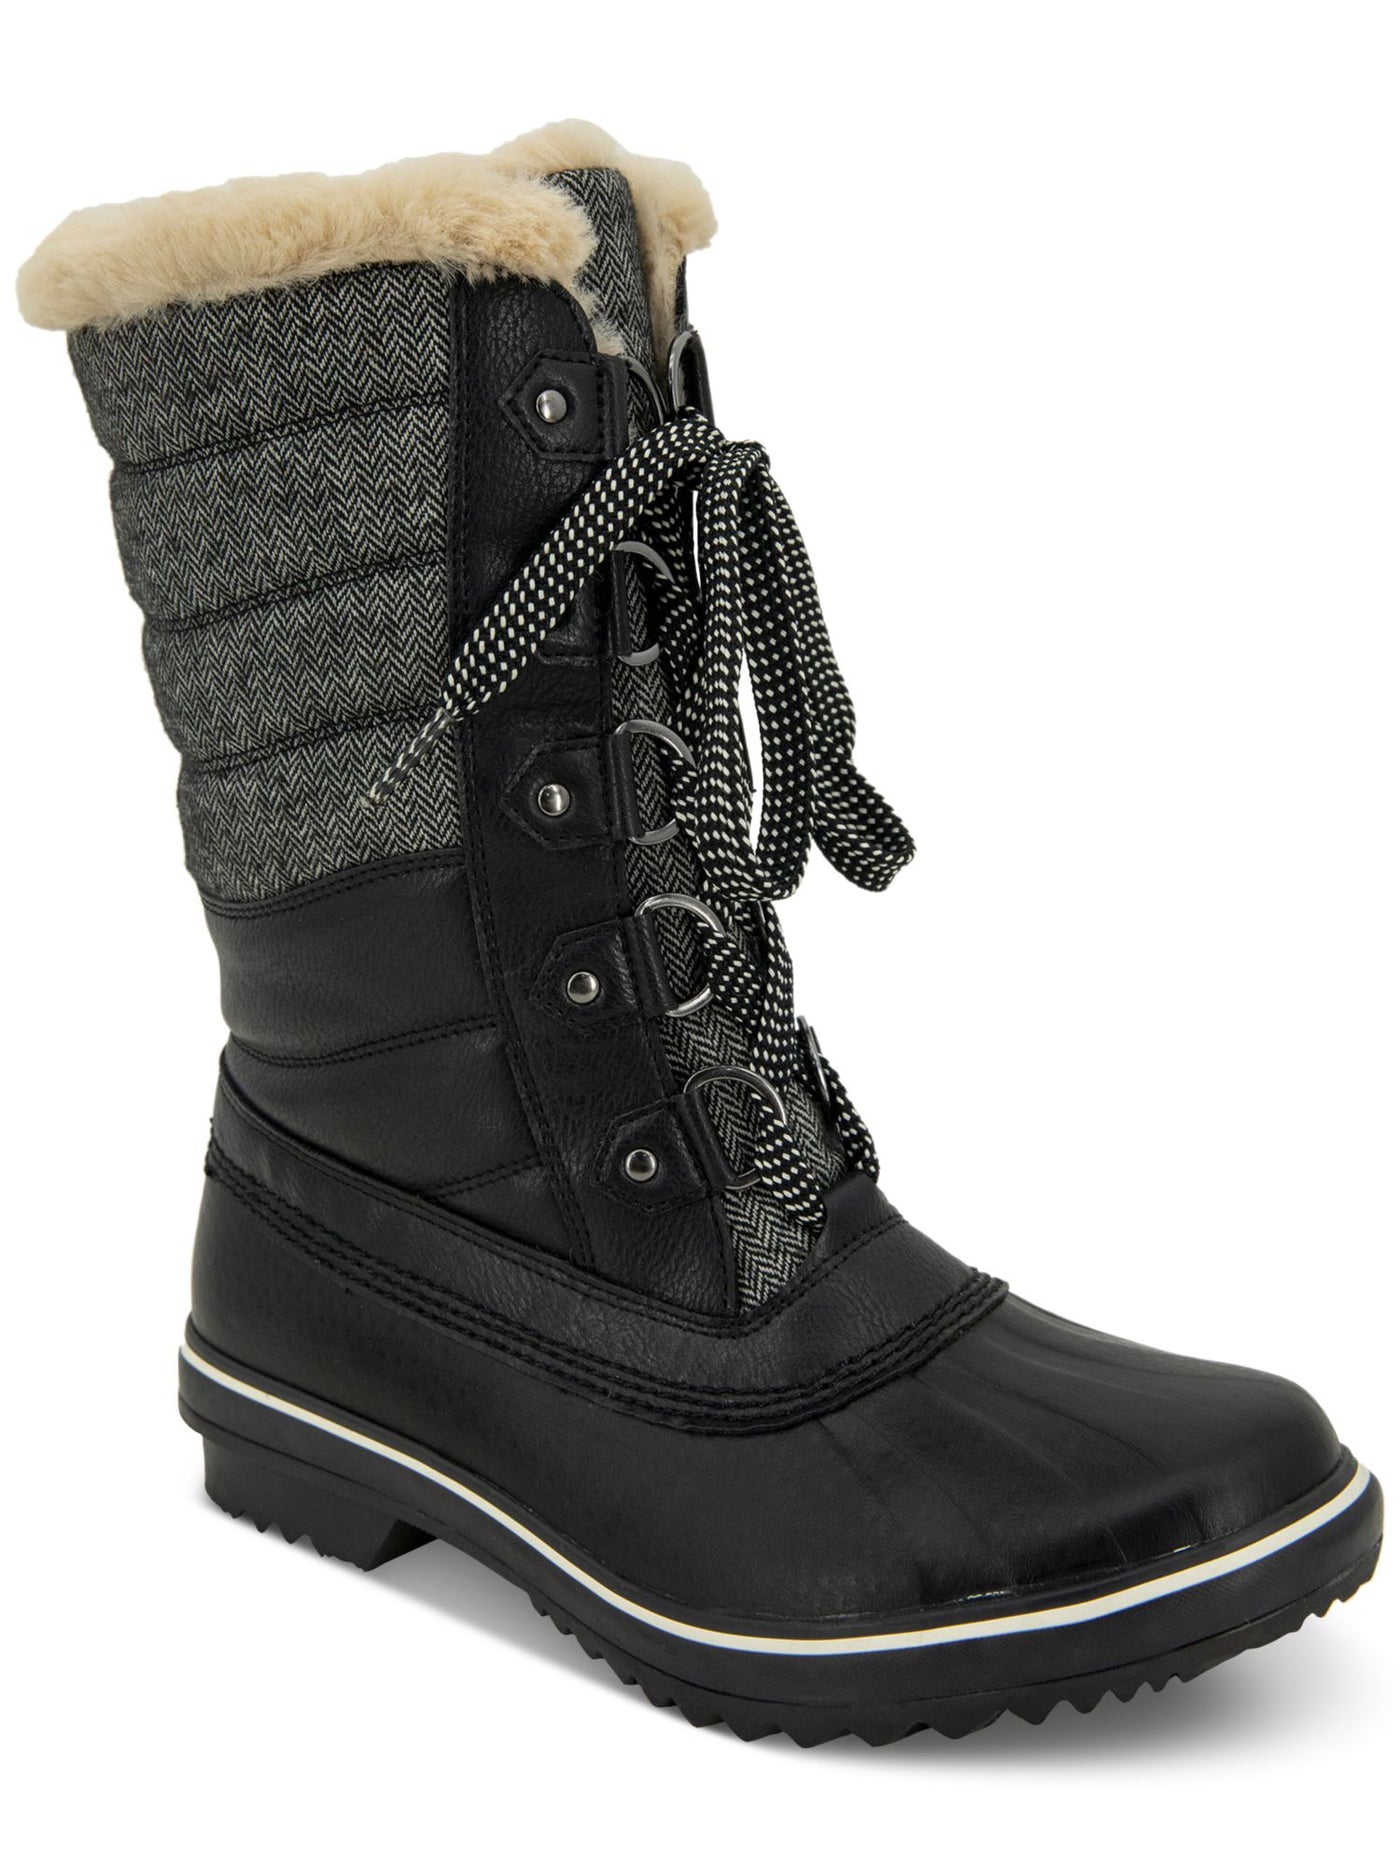 JBU BY JAMBU Womens Black Water Resistant Quilted Siberia Round Toe Lace-Up Winter 8 M